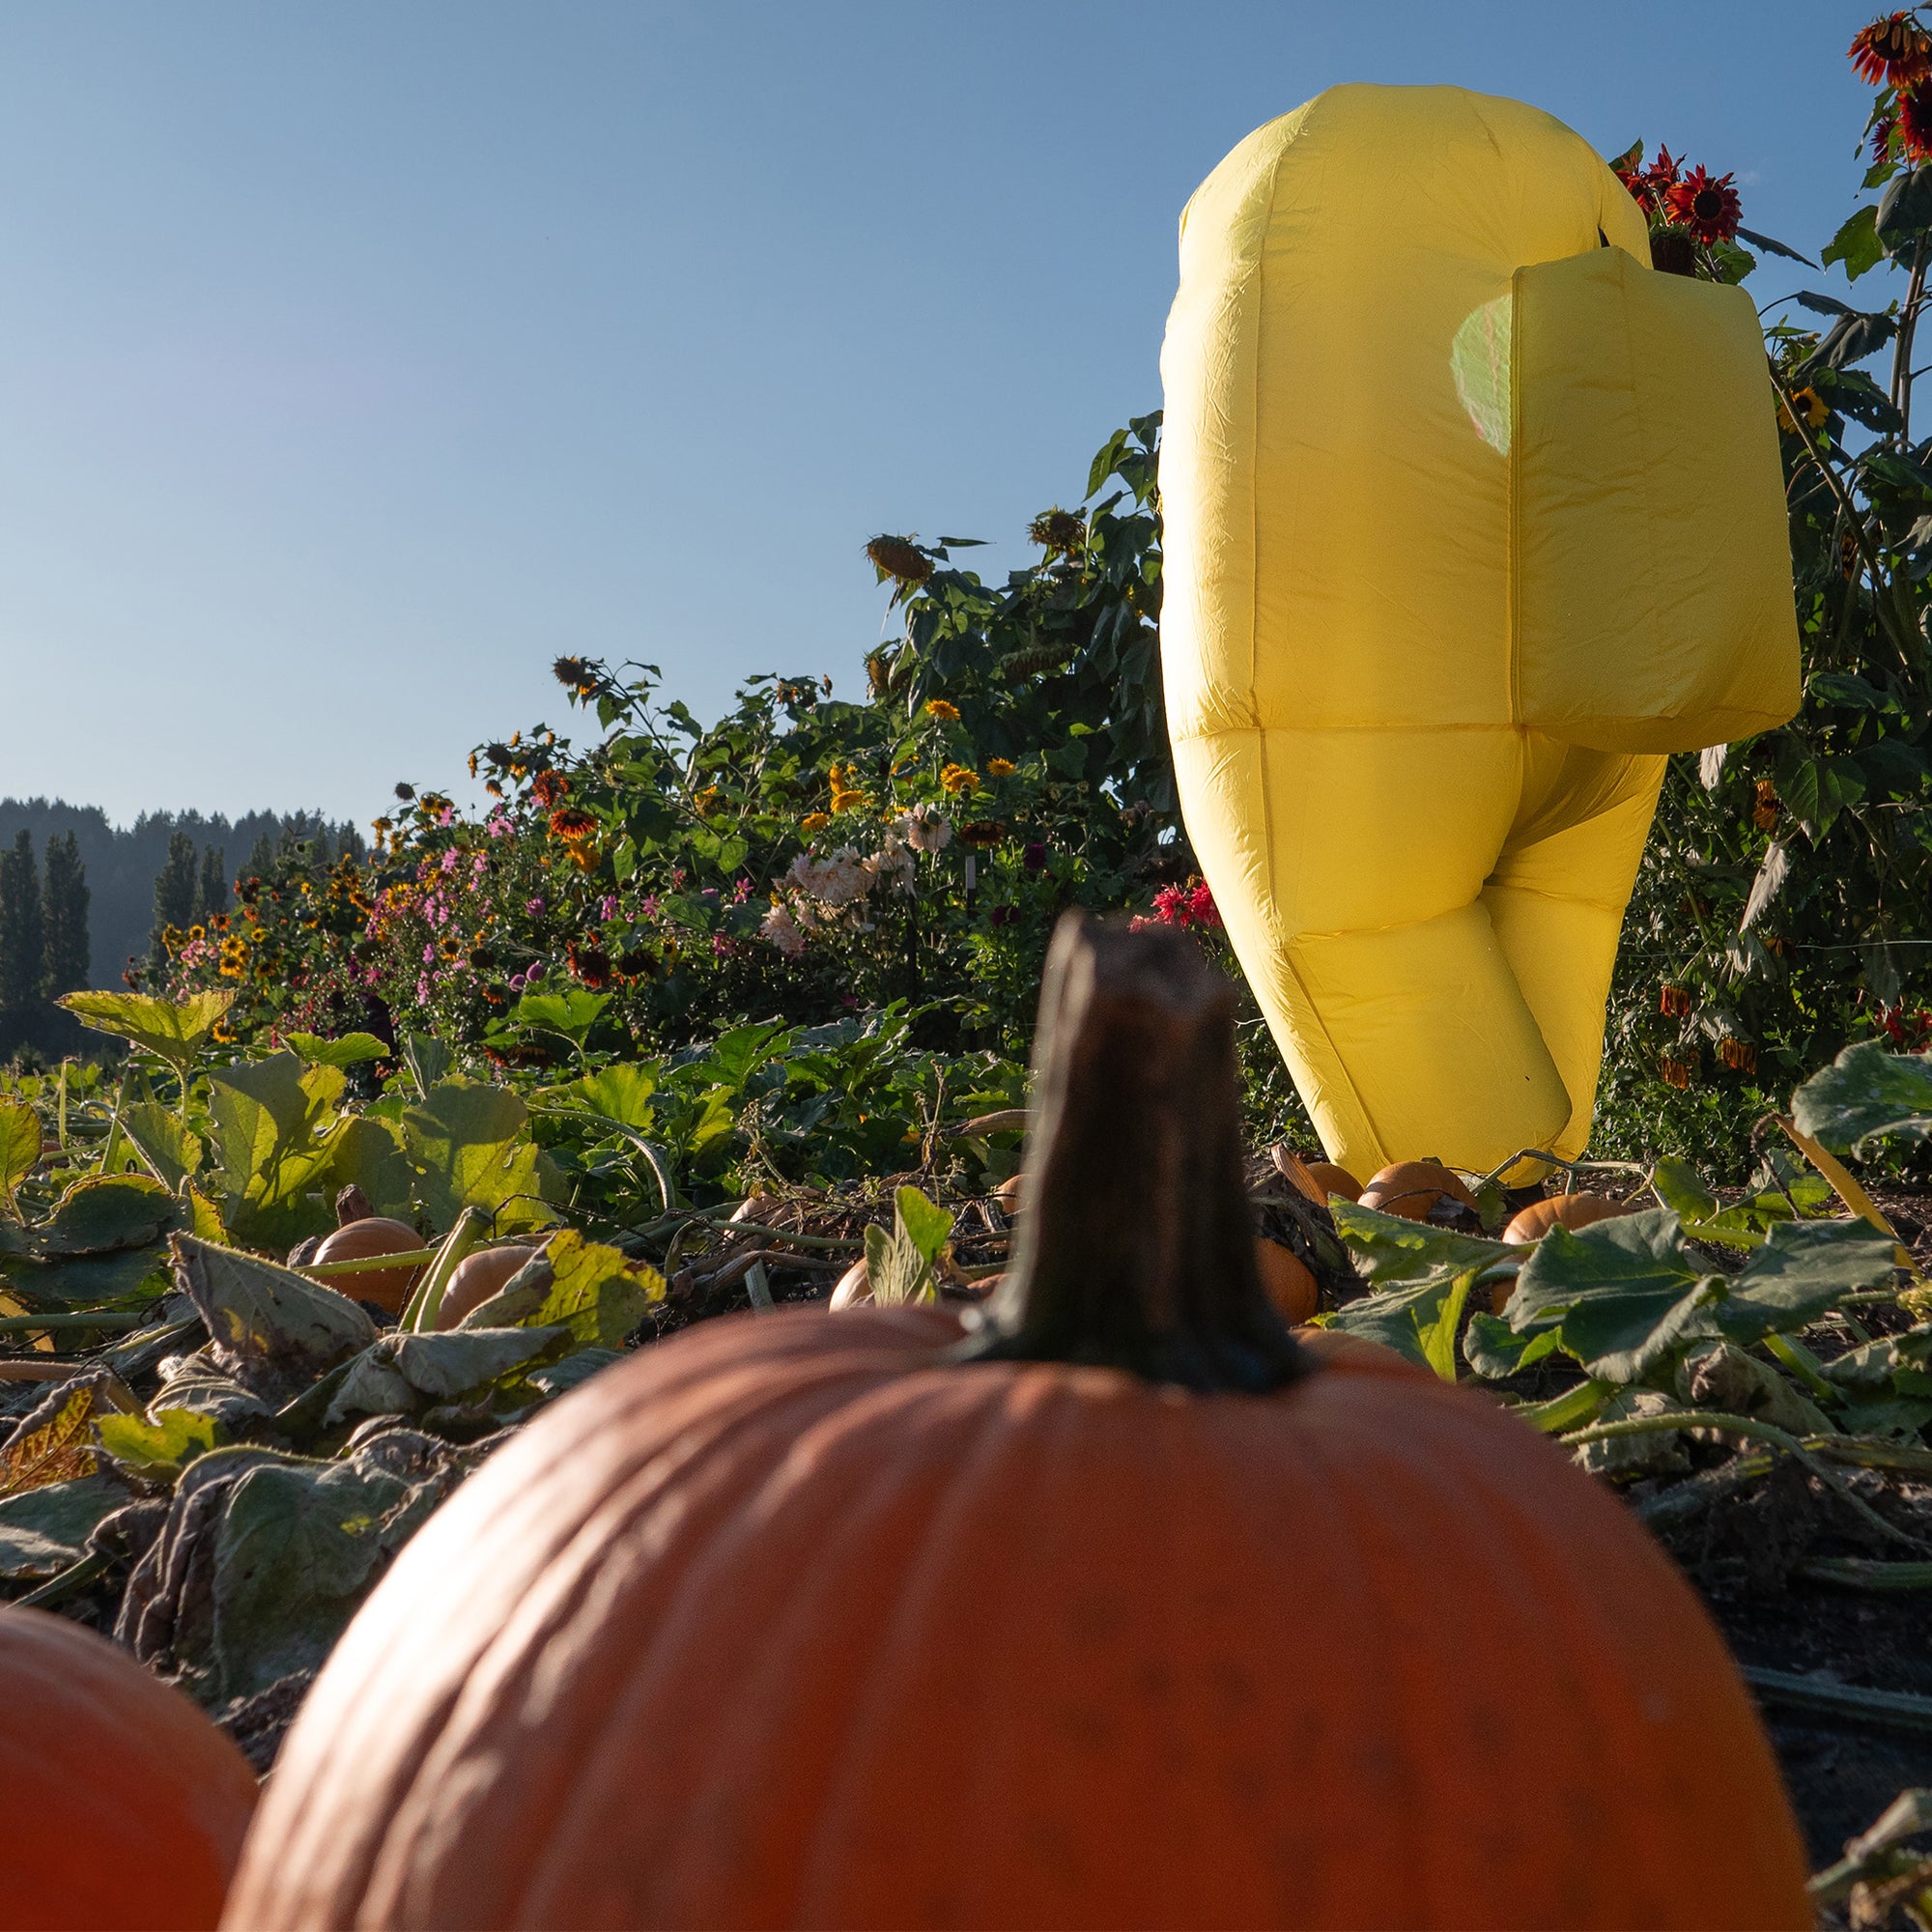  A photograph of the yellow inflatable Crewmate leaning over a table looking at an arrangement of seasonal gourds and pumpkins.